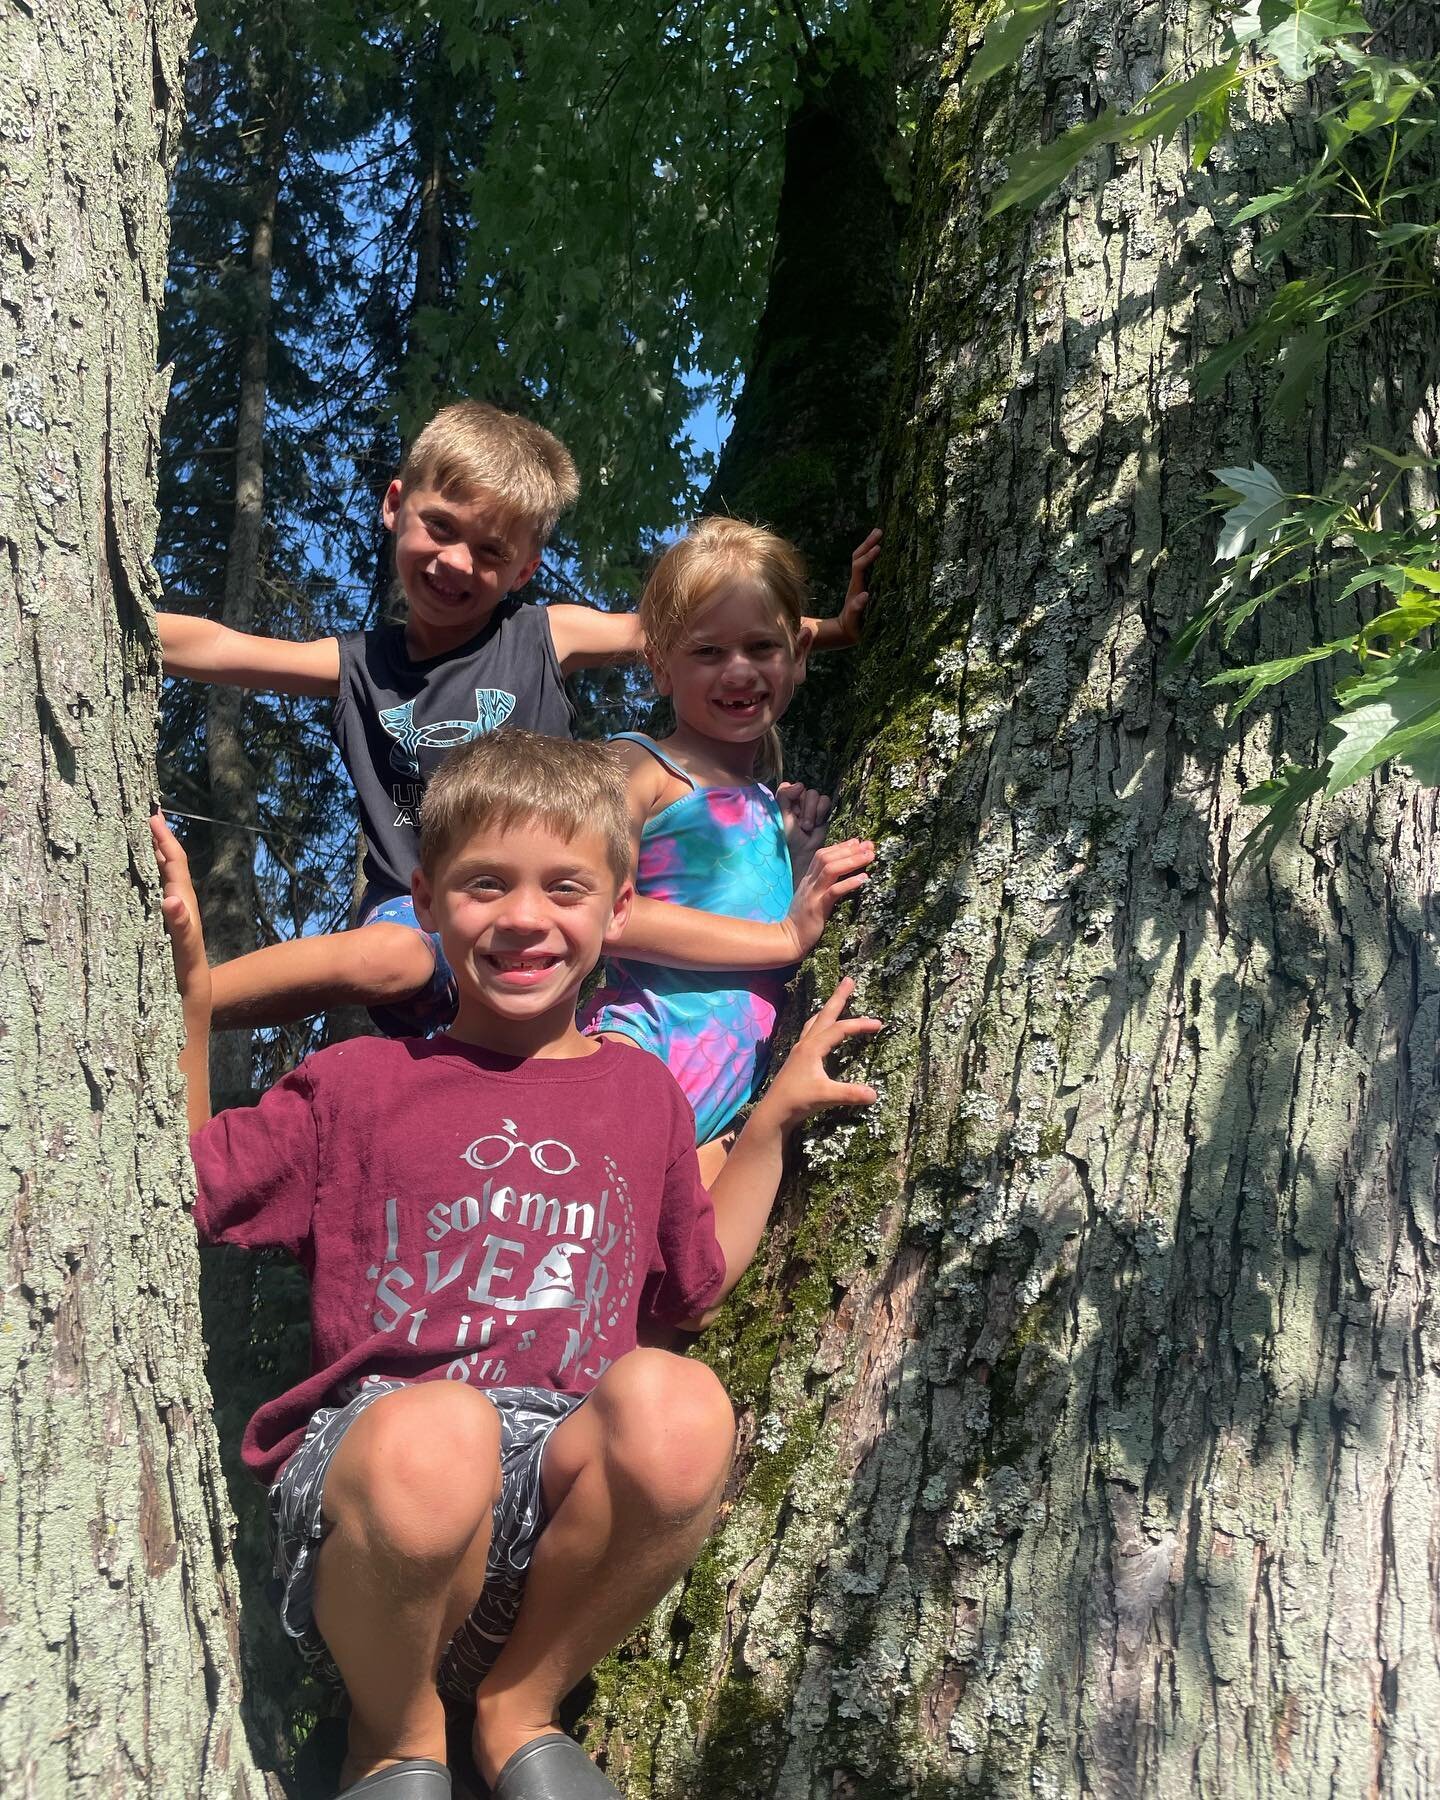 Same tree our kids used to climb and have fun!  Now our grandkids❤️